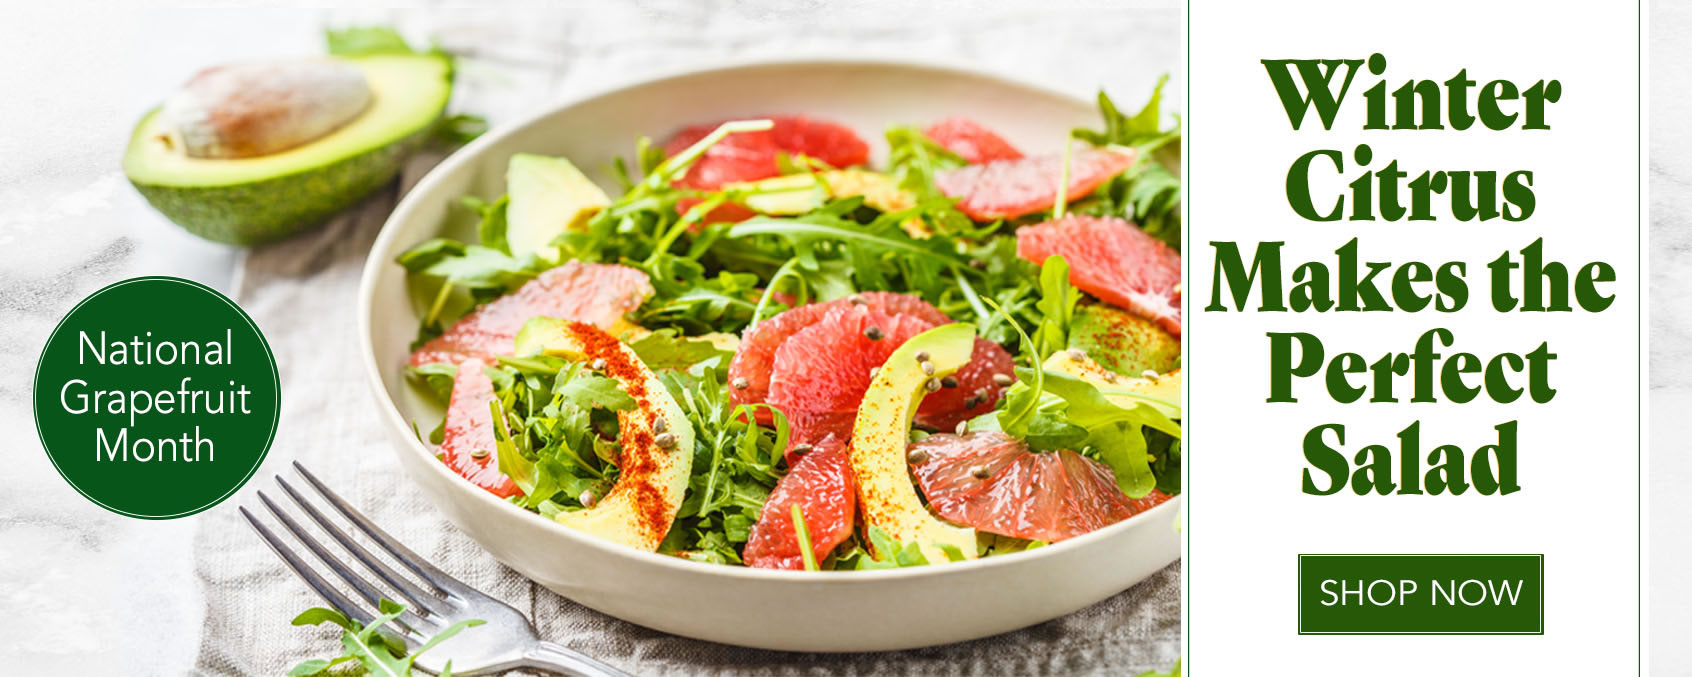 Winter Citrus makes for the Perfect Salad.  National Grapefruit Month